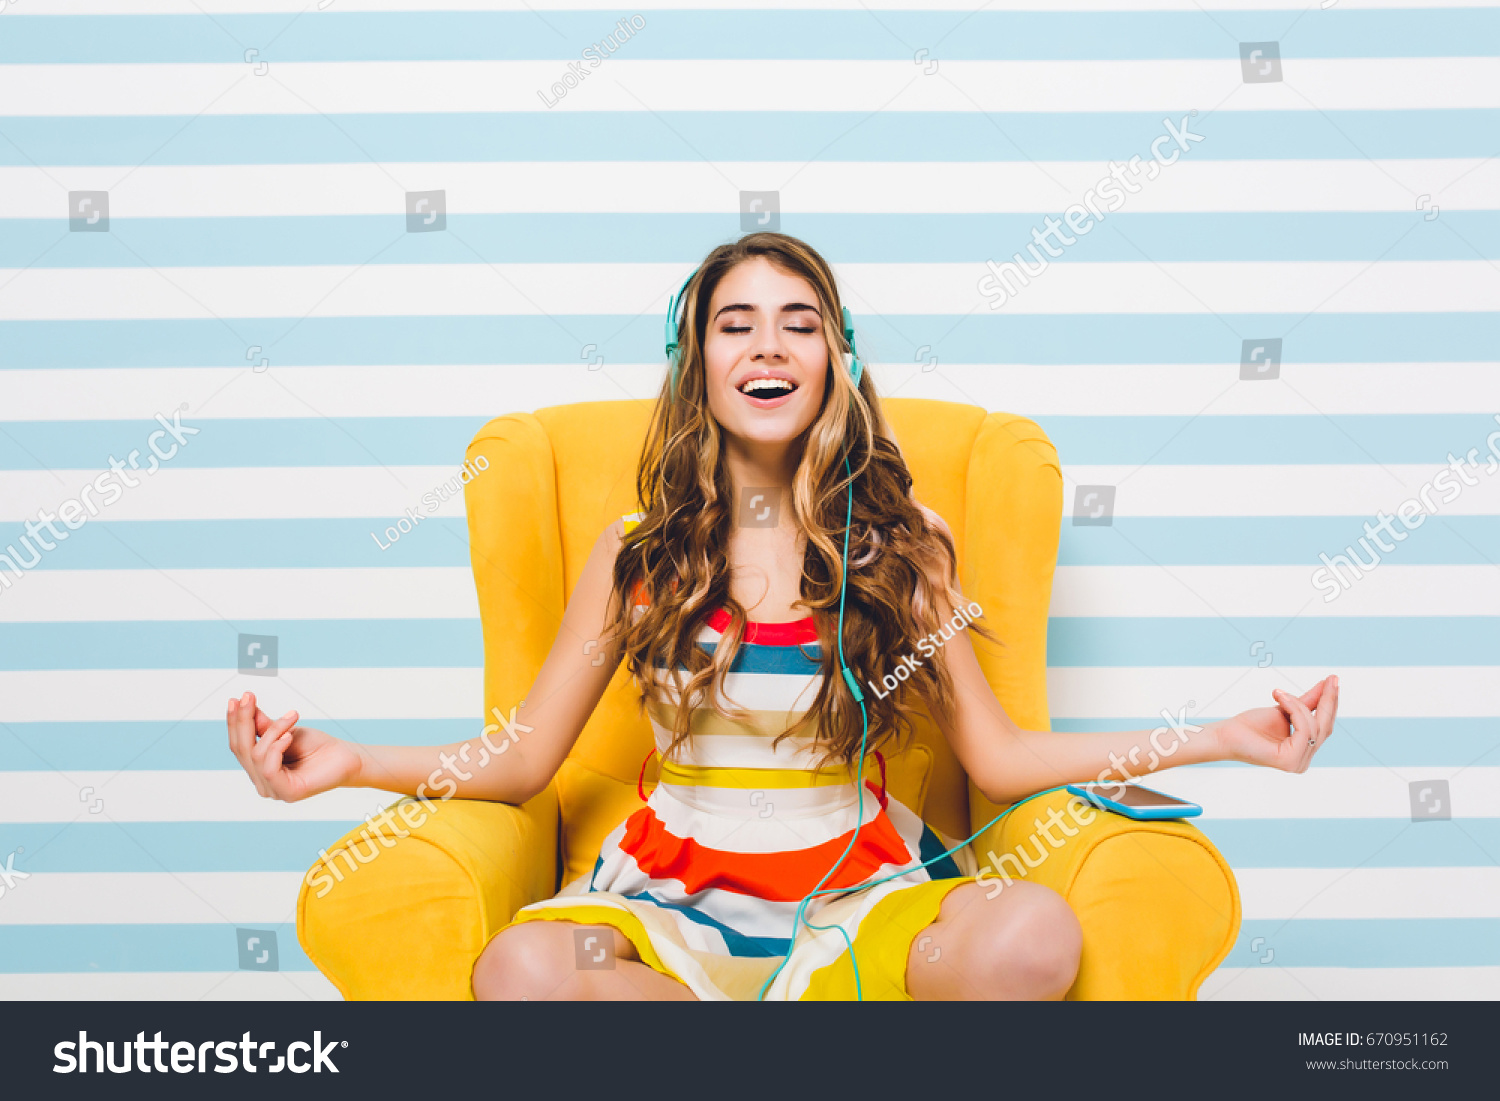 Joyful long-haired girl meditating while sitting in a lotus pose on blue striped background. Pretty young woman in colorful dress chilling in yellow armchair and listening relaxing music. #670951162